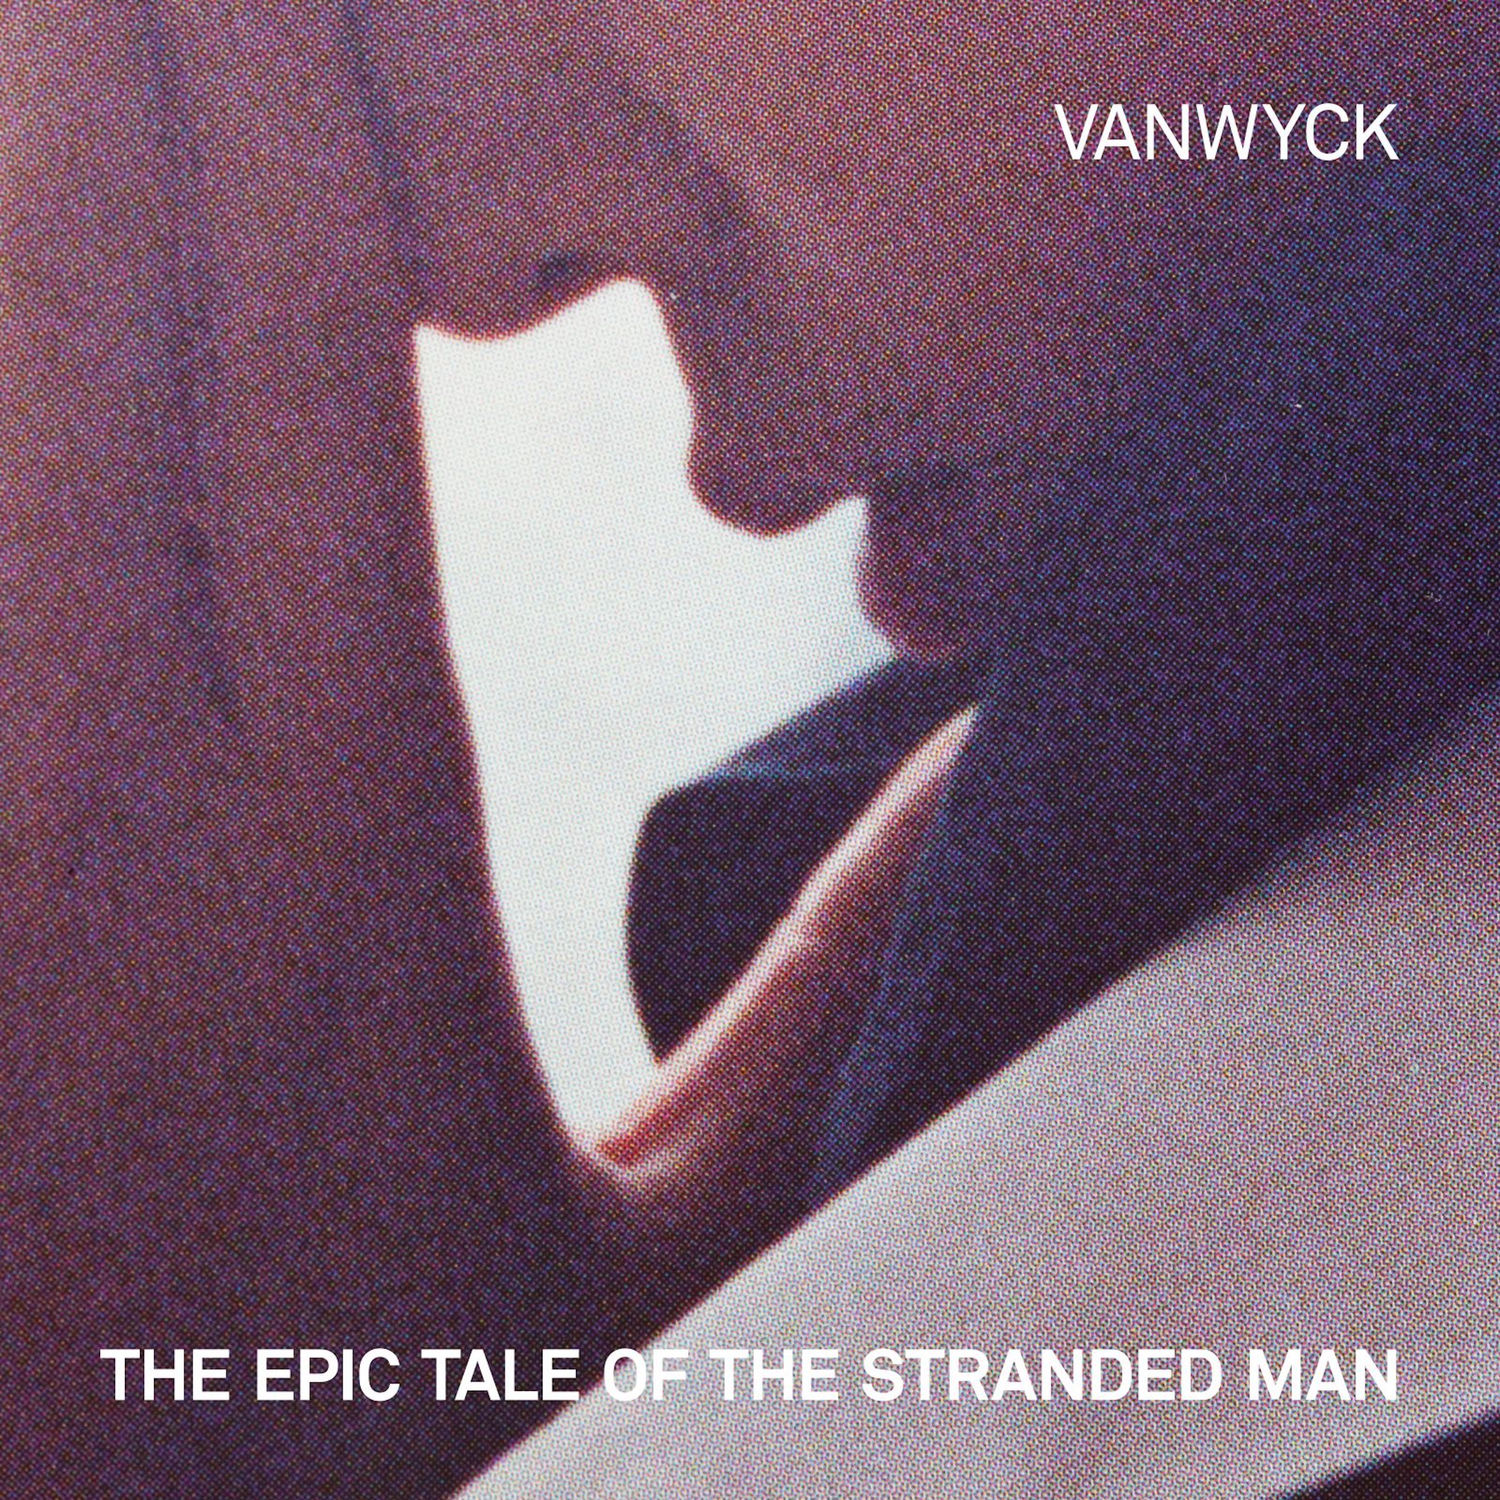 Van Wyck - The Epic Tale Of The Stranded Man